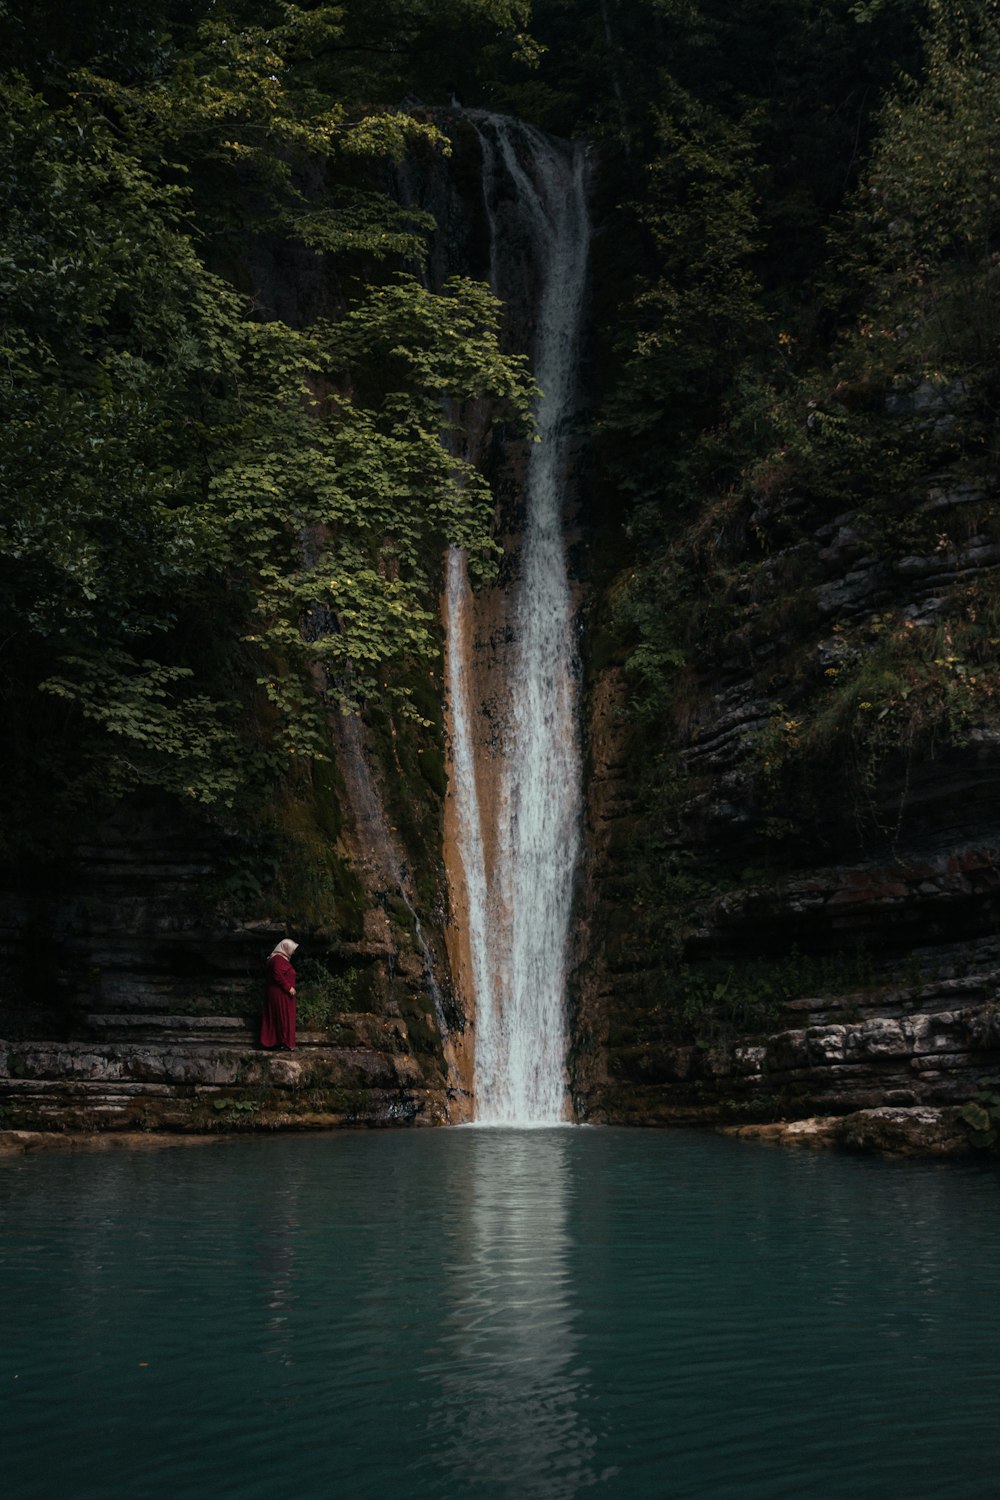 person in red jacket standing on brown wooden dock near waterfalls during daytime